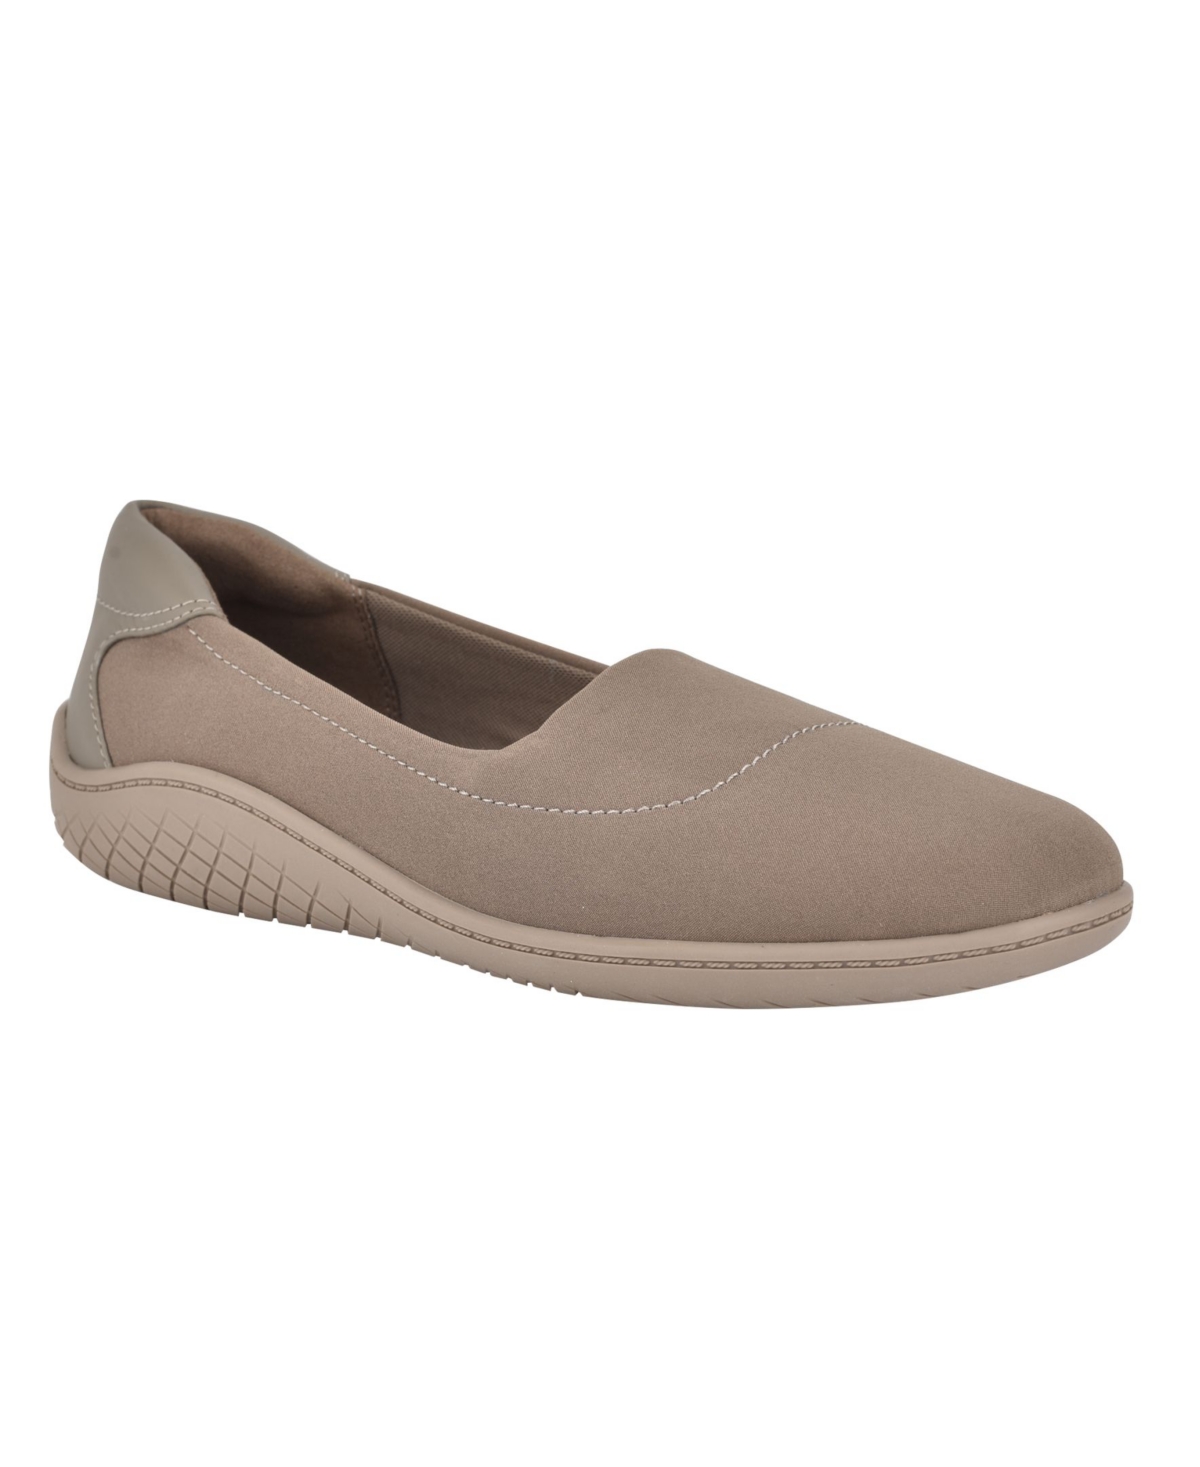 Women's Gift Slip-On Casual Shoe - Taupe